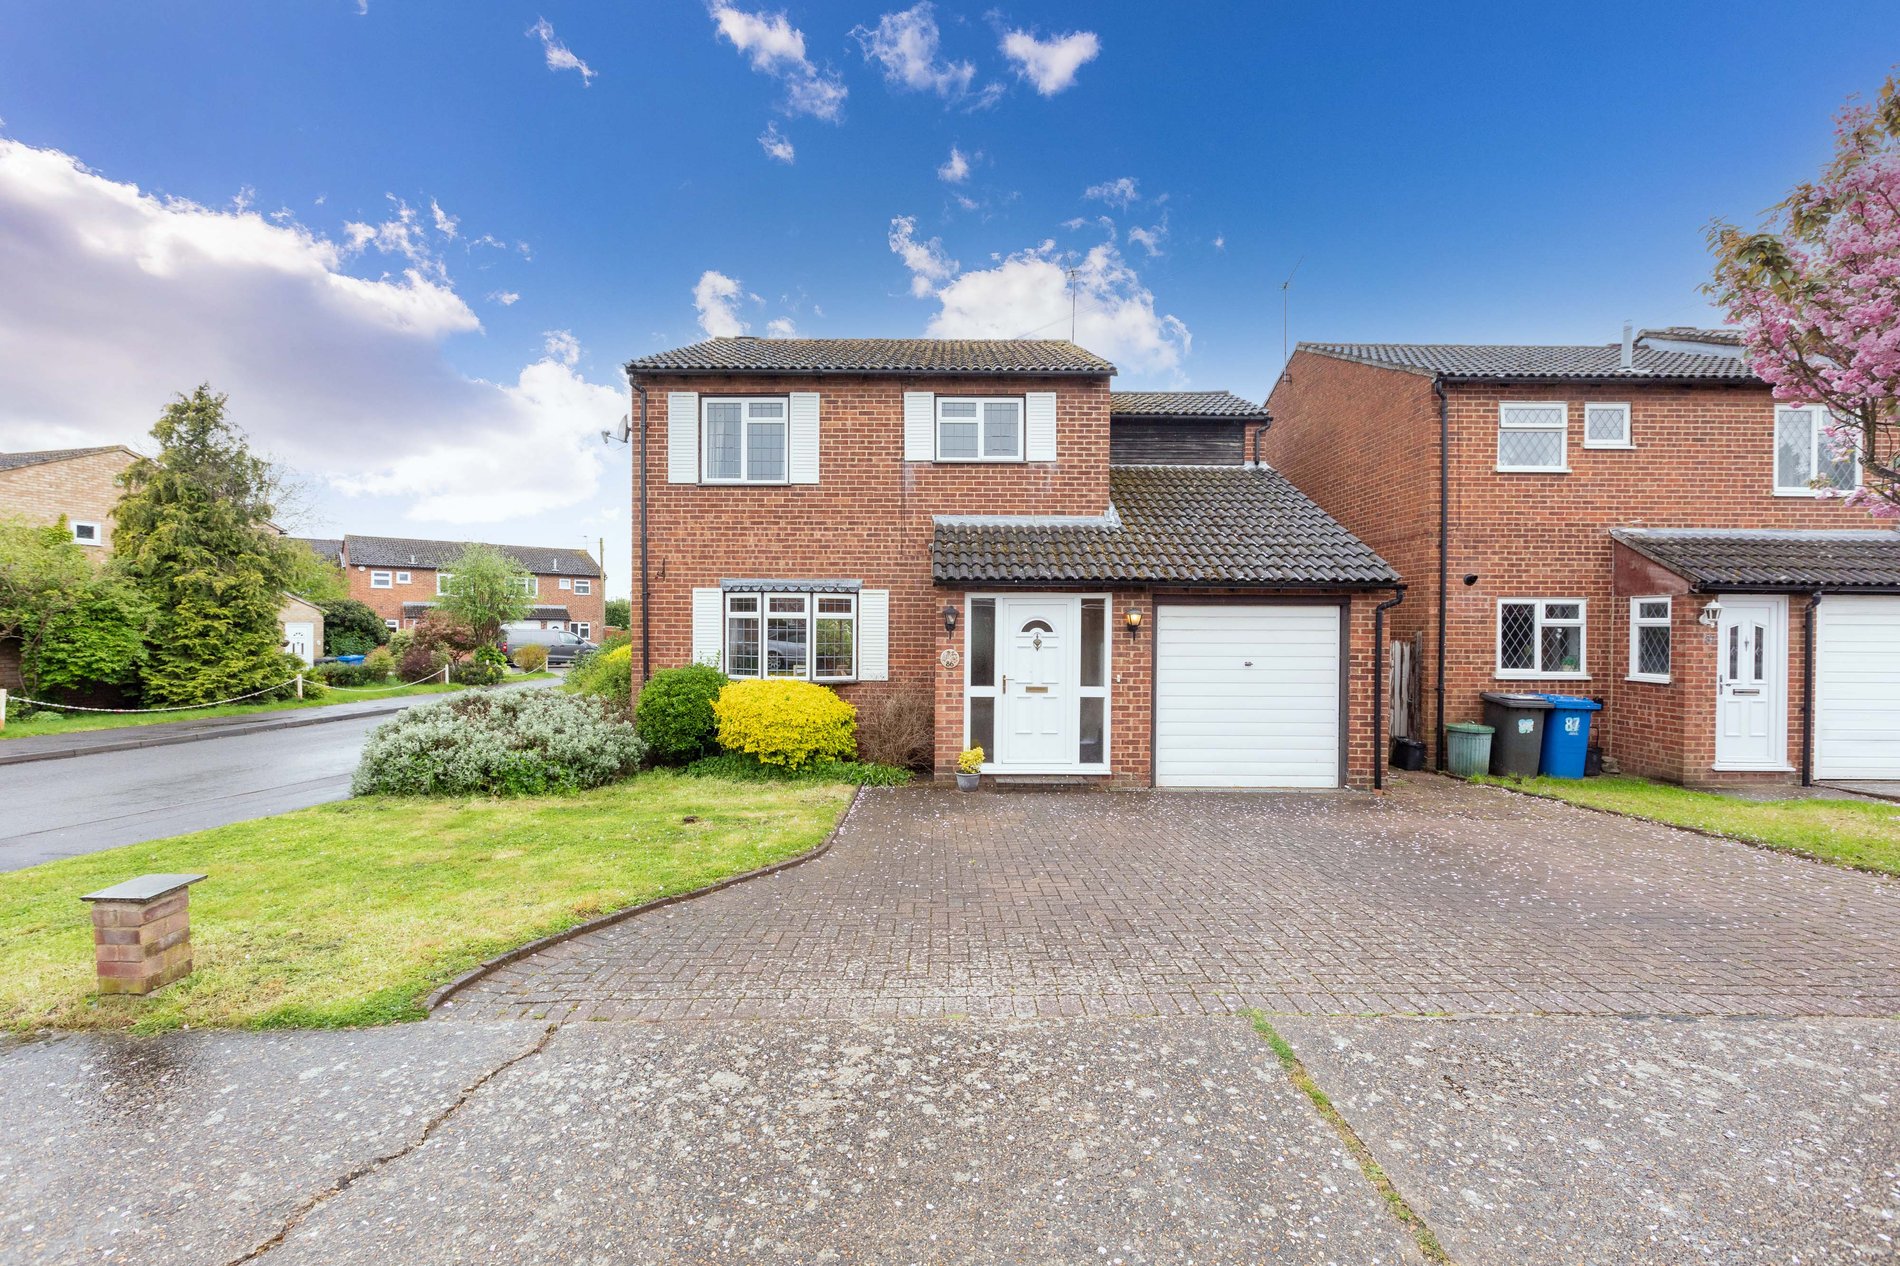 4 bed detached house for sale in Aysgarth Park, Maidenhead - Property Image 1